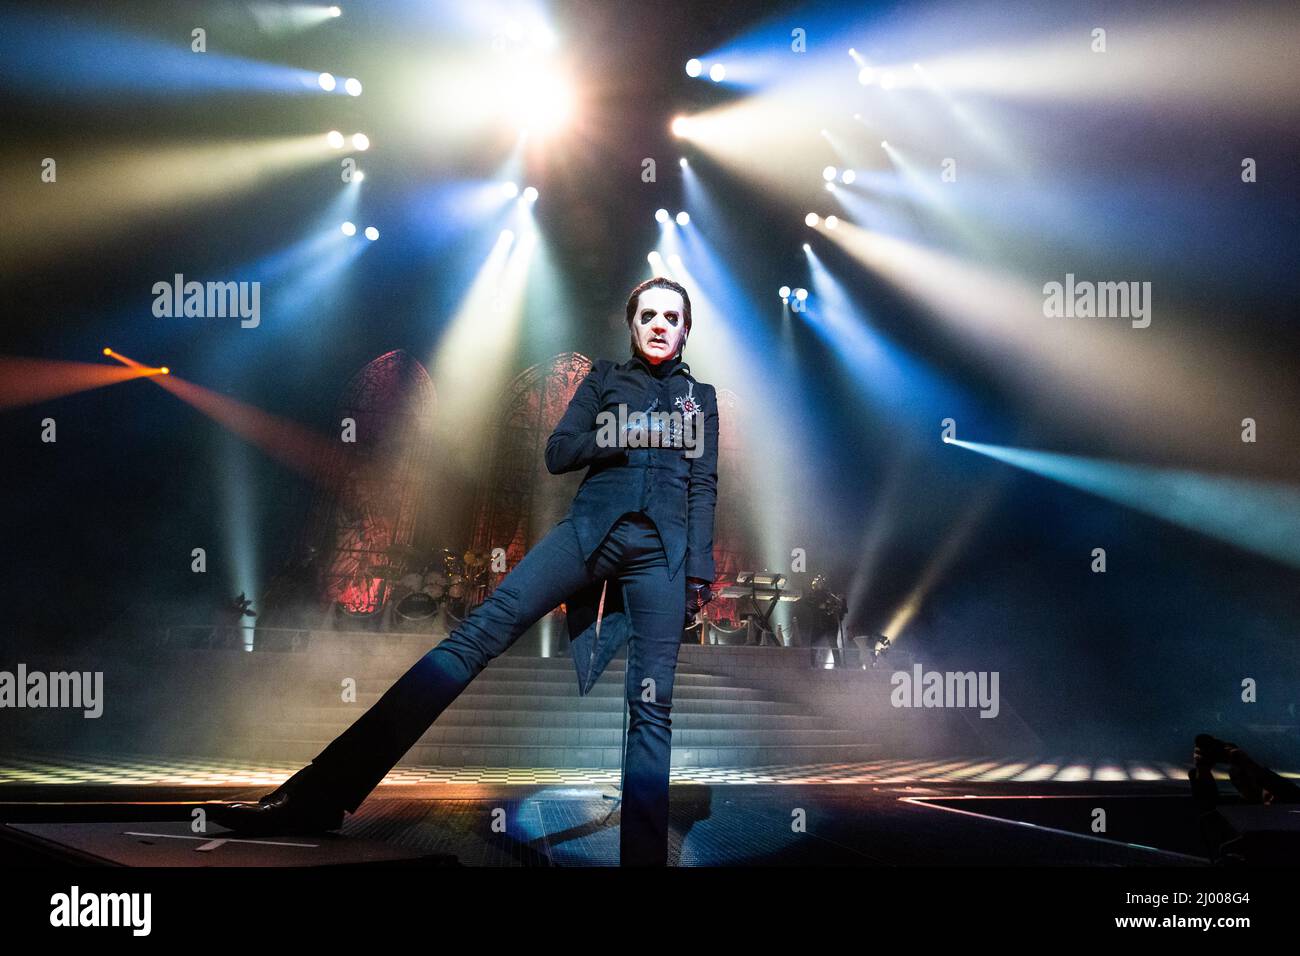 Tobias Forge of rock band Ghost performing live in concert at Oslo Spektrum on 22 February 2019 Stock Photo